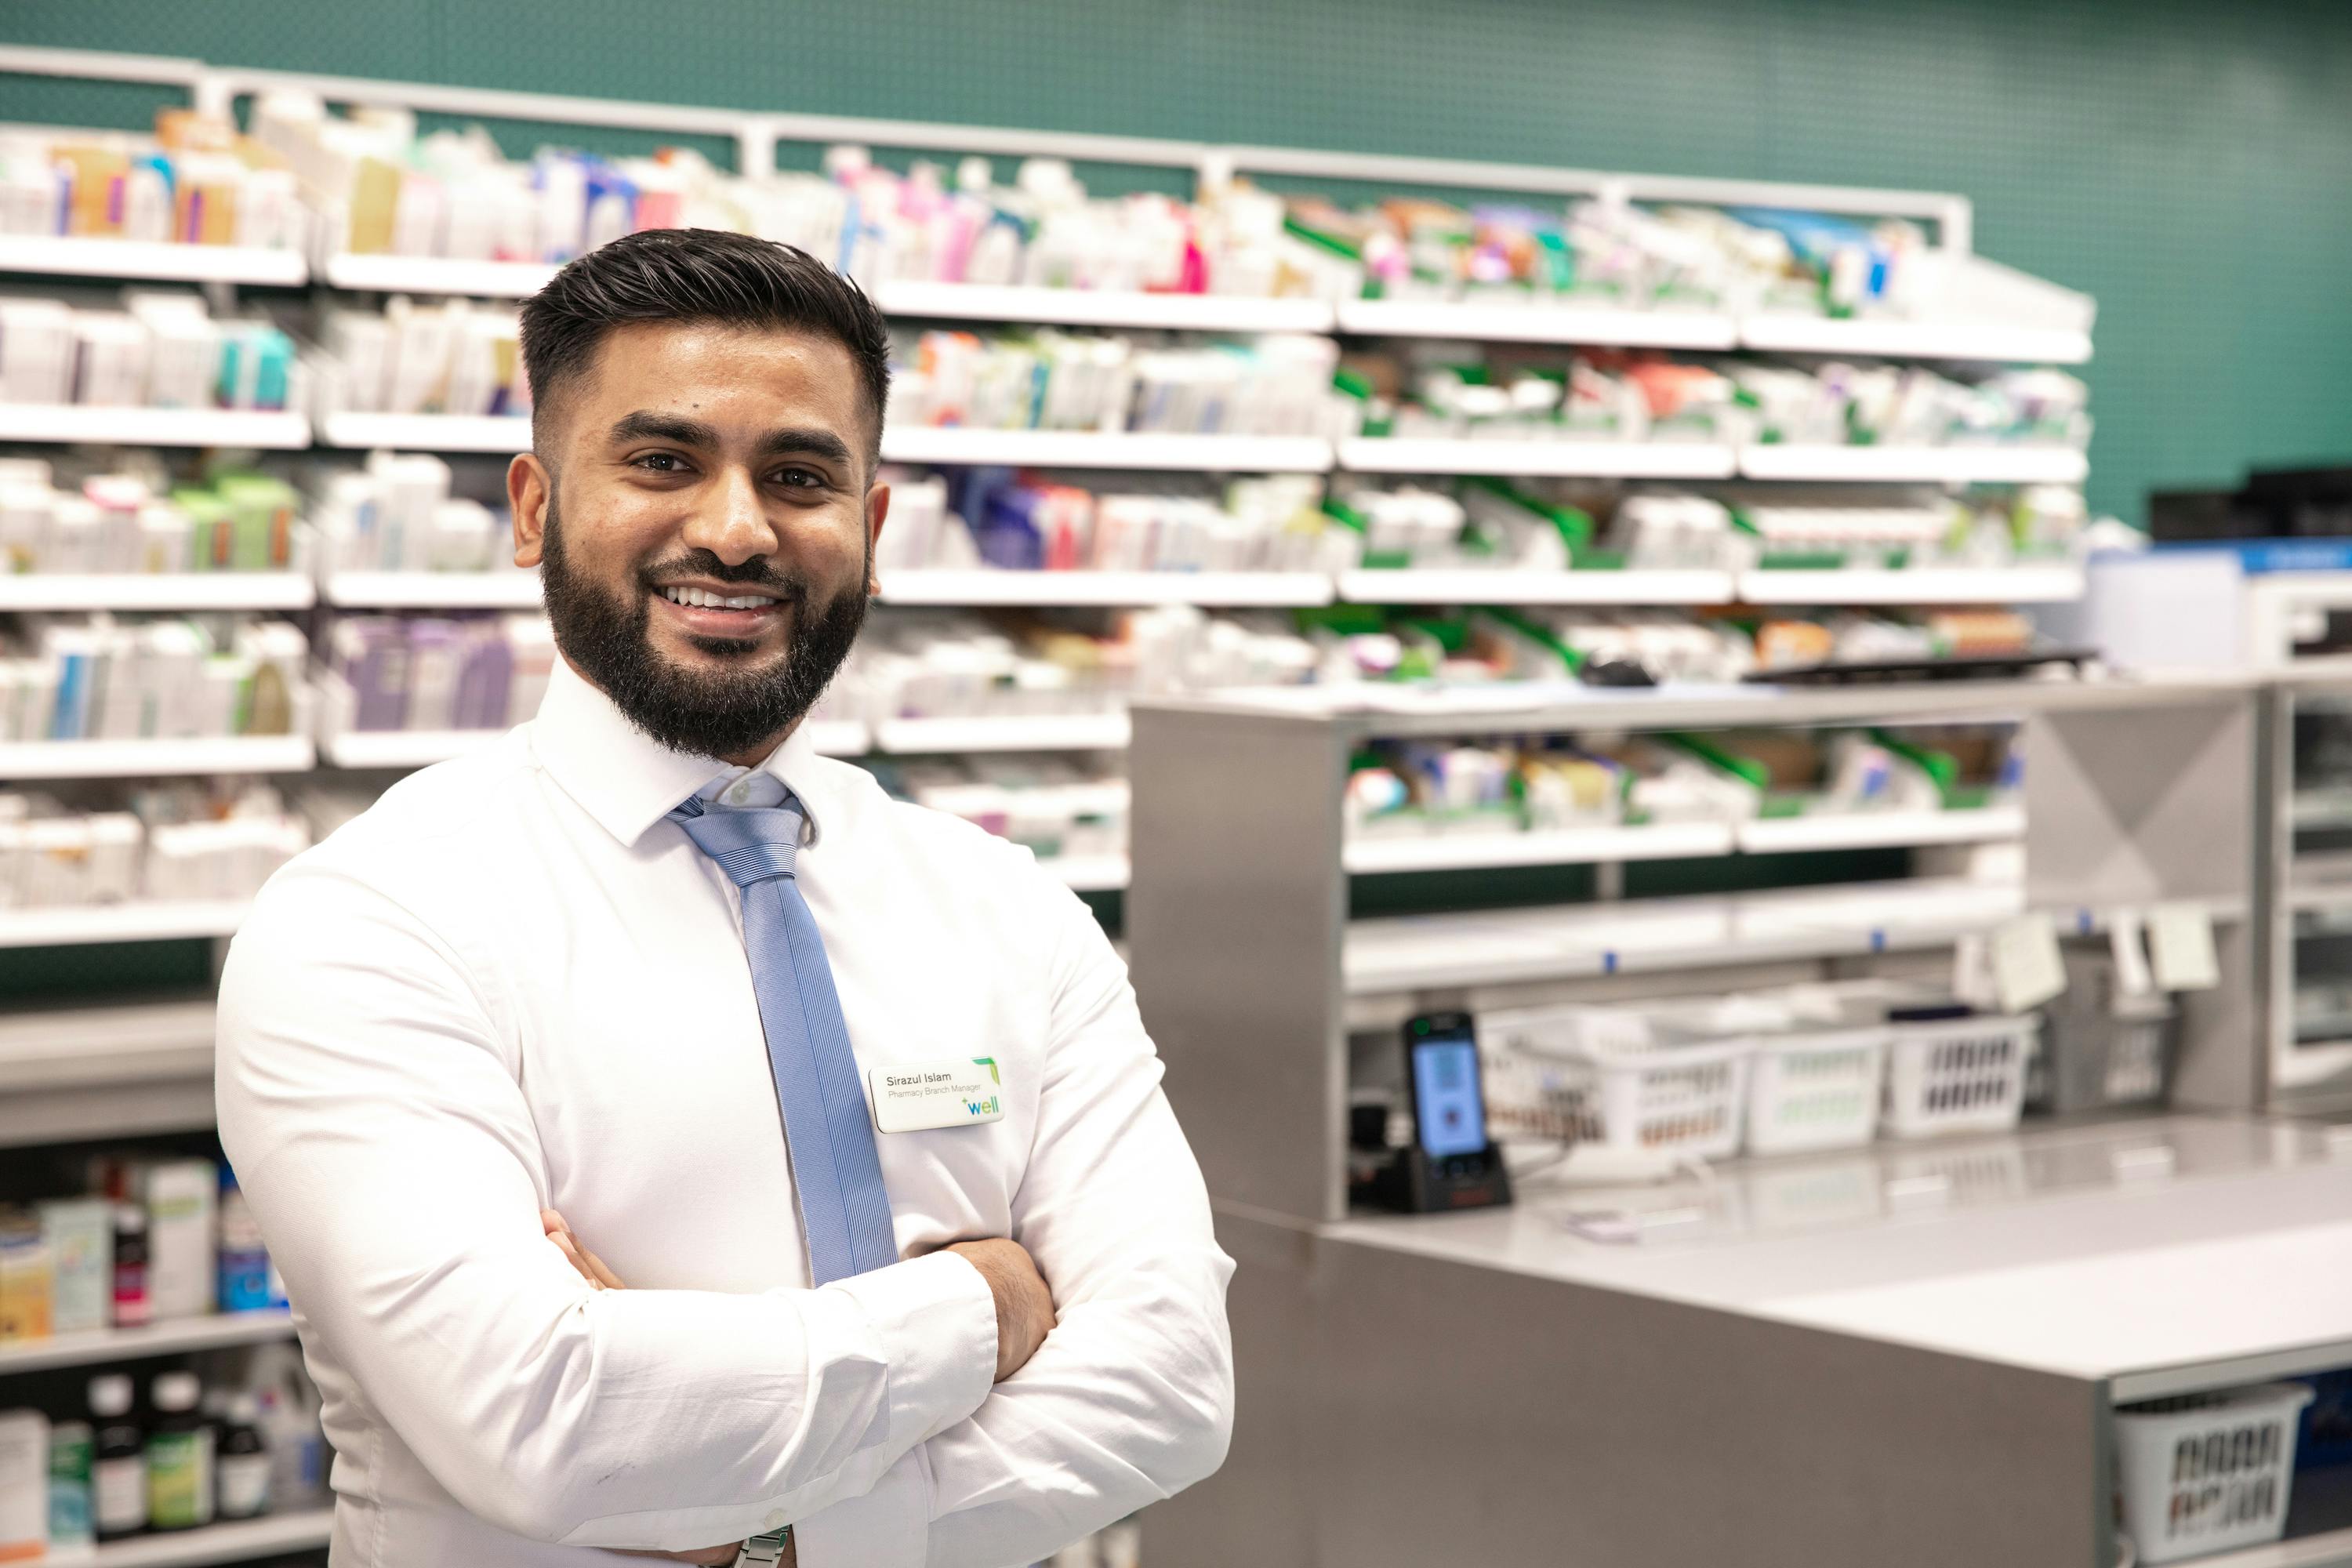 A Well pharmacist standing in front of shelves of medication.